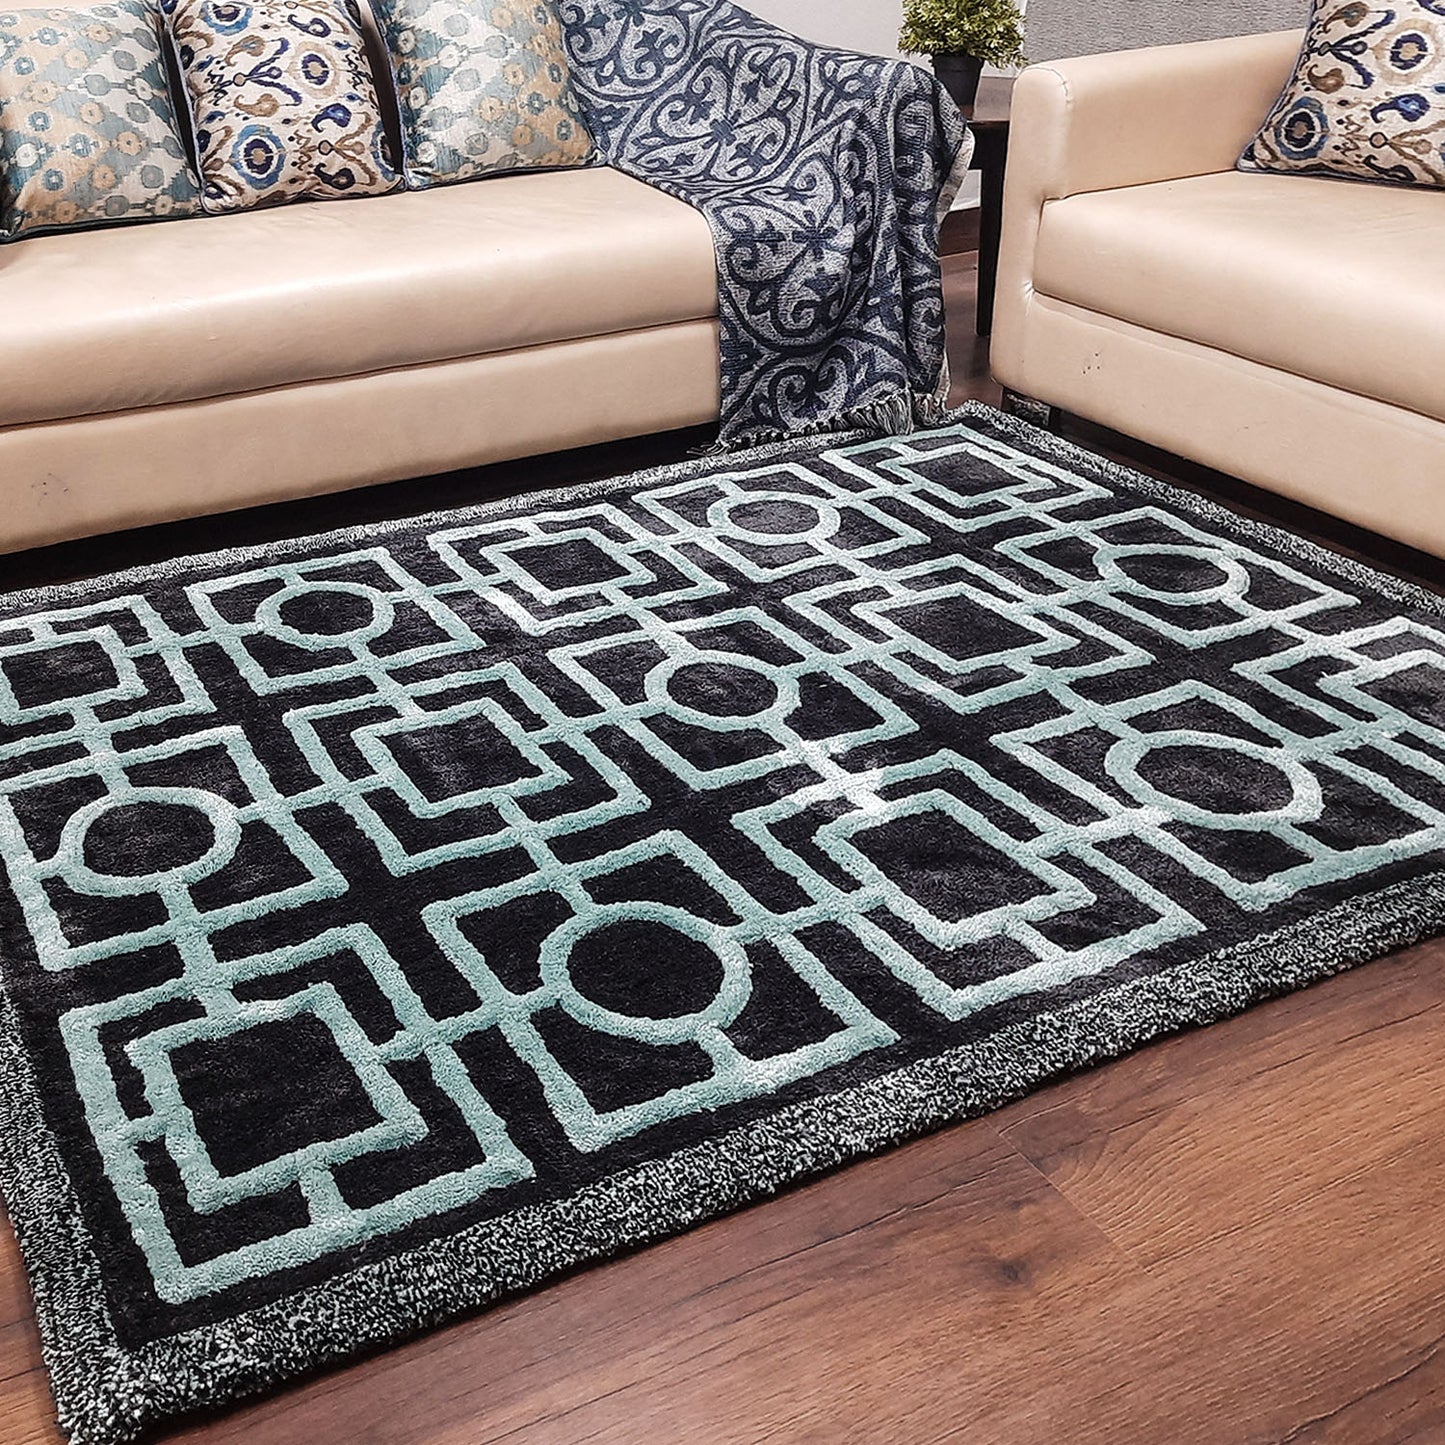 Avioni Modern Collection- Micro Black & Grey With Geometric Design Tufted Carpet-Different Sizes Shaggy Fluffy Rugs and Carpet for Living Room